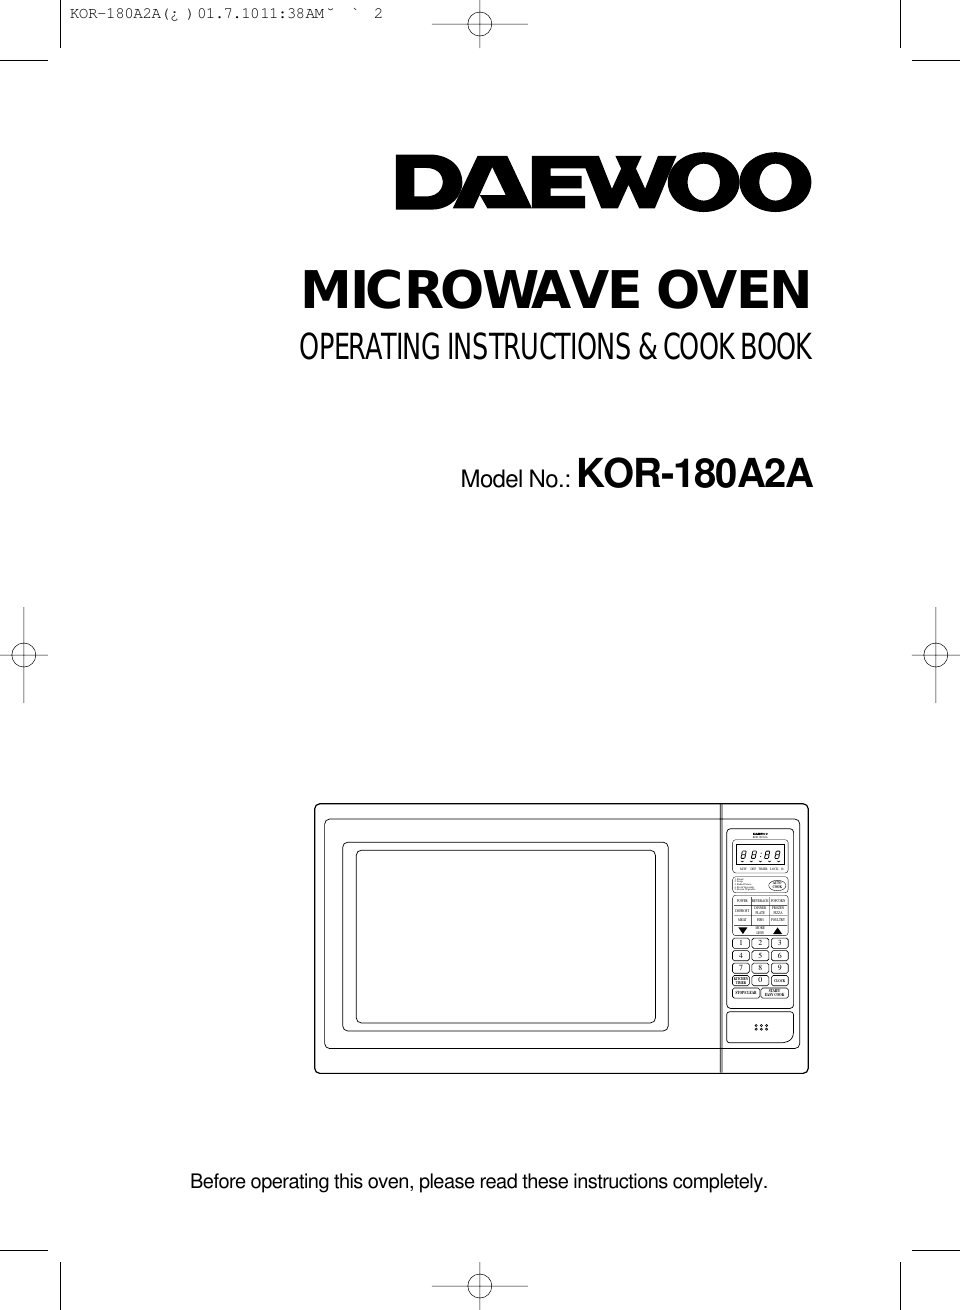 MICROWAVE OVENOPERATING INSTRUCTIONS &amp; COOK BOOKModel No.: KOR-180A2ABefore operating this oven, please read these instructions completely.1 2 34 5 67 8 90STOP/CLEARKITCHENTIMER CLOCKAUTOCOOKPOWERDEFROSTMEATBEVERAGEDINNERPLATEFISHMORELESSPOPCORNFROZENPIZZAPOULTRY1. Bread2. Soup3. Baked Potato4. Fresh Vegetable5. Frozen VegetableM/W DEF TIMERKOR-180A2ALOCK lbSTART/EASY COOK KOR-180A2A(¿ )  01.7.10 11:38 AM  ˘`2